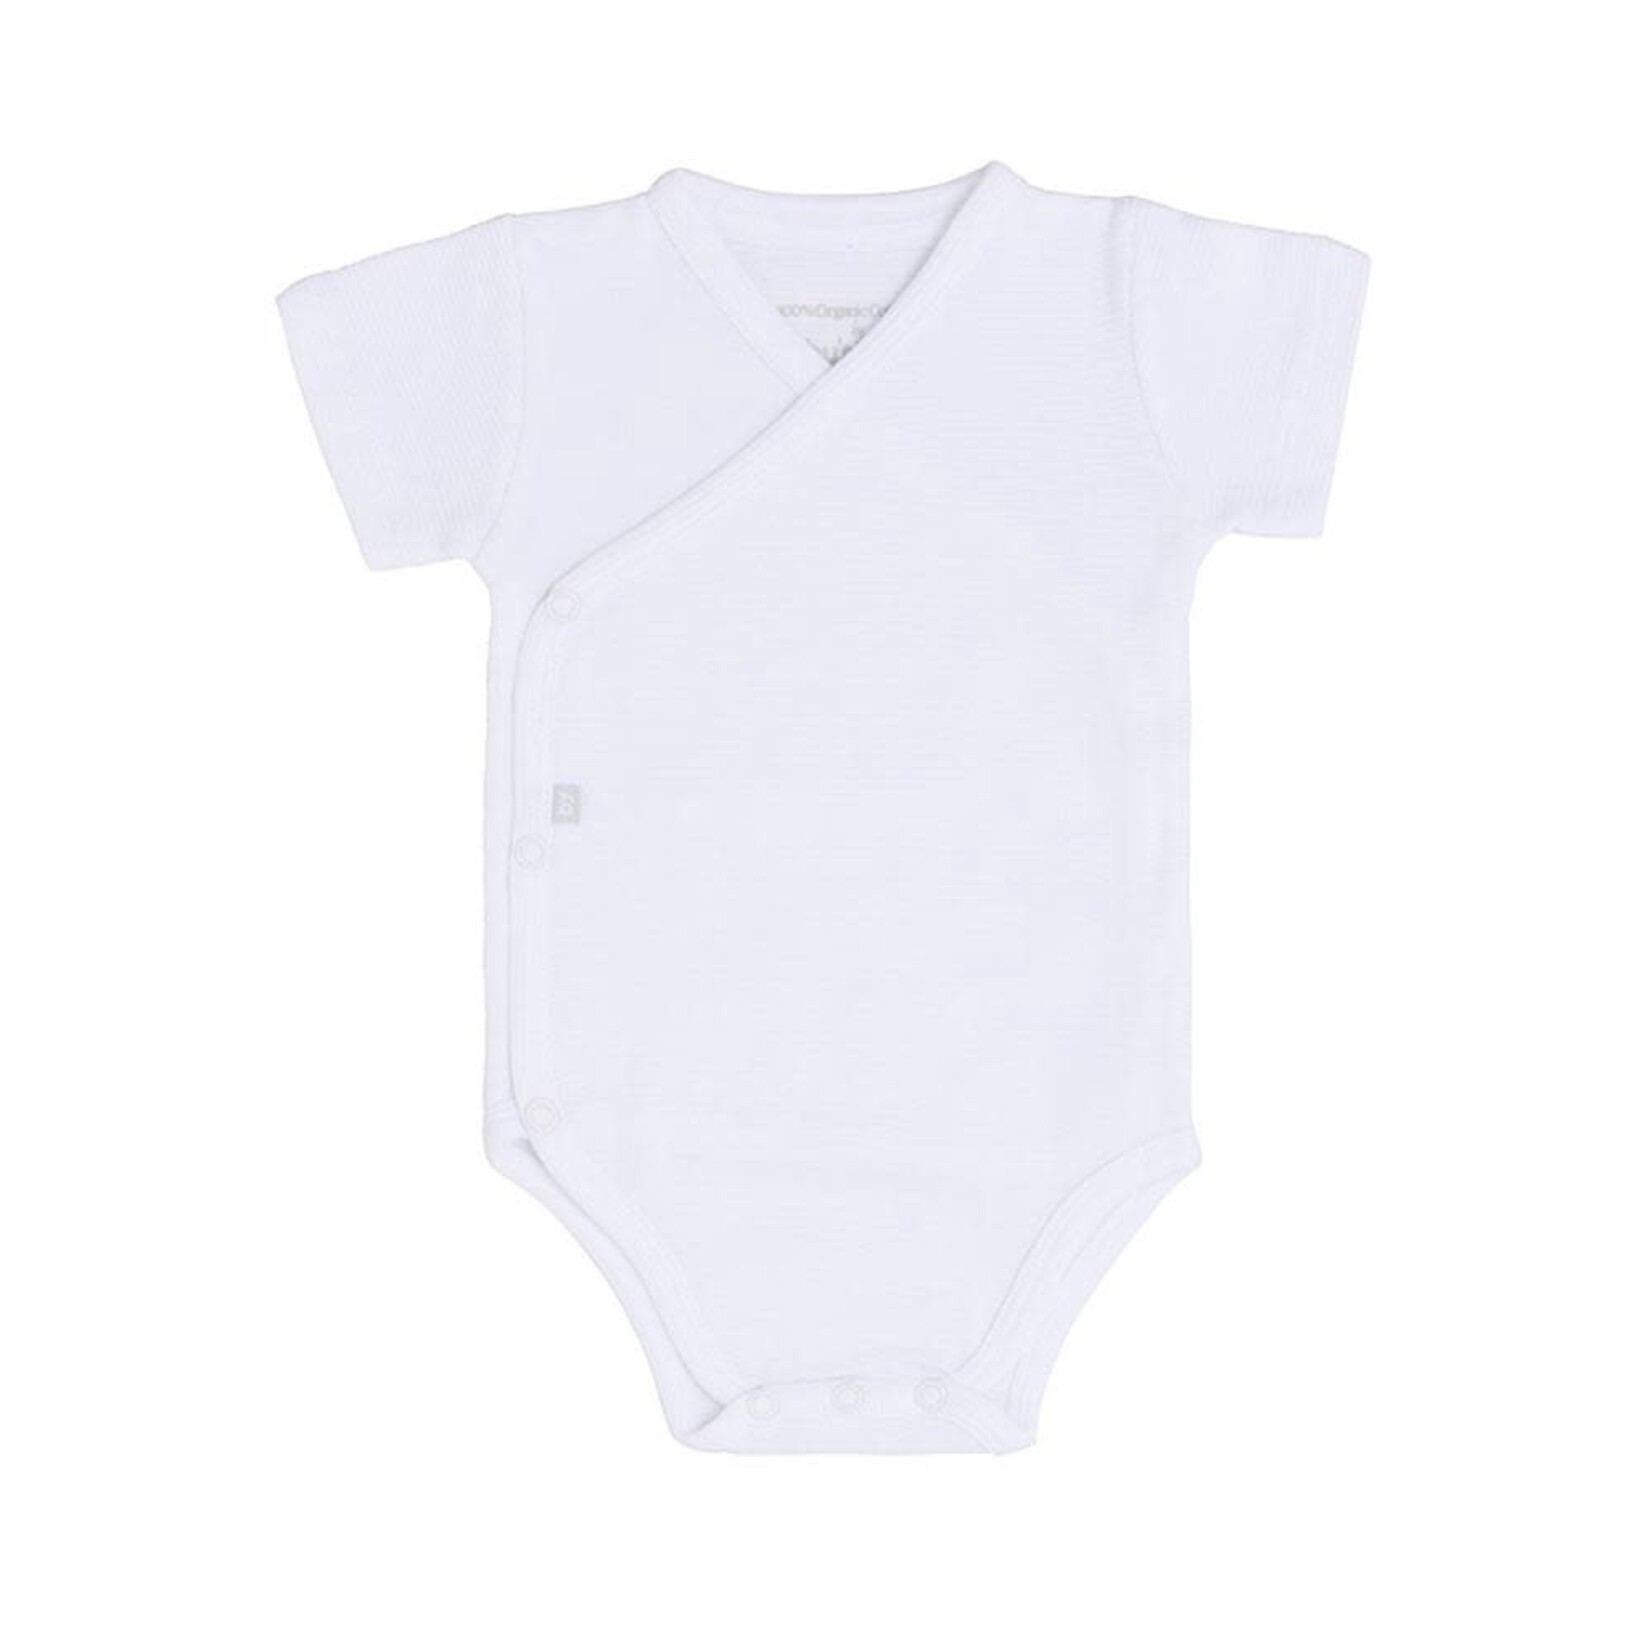 Baby's Only Baby's Only - Rompertje Pure wit - 3M